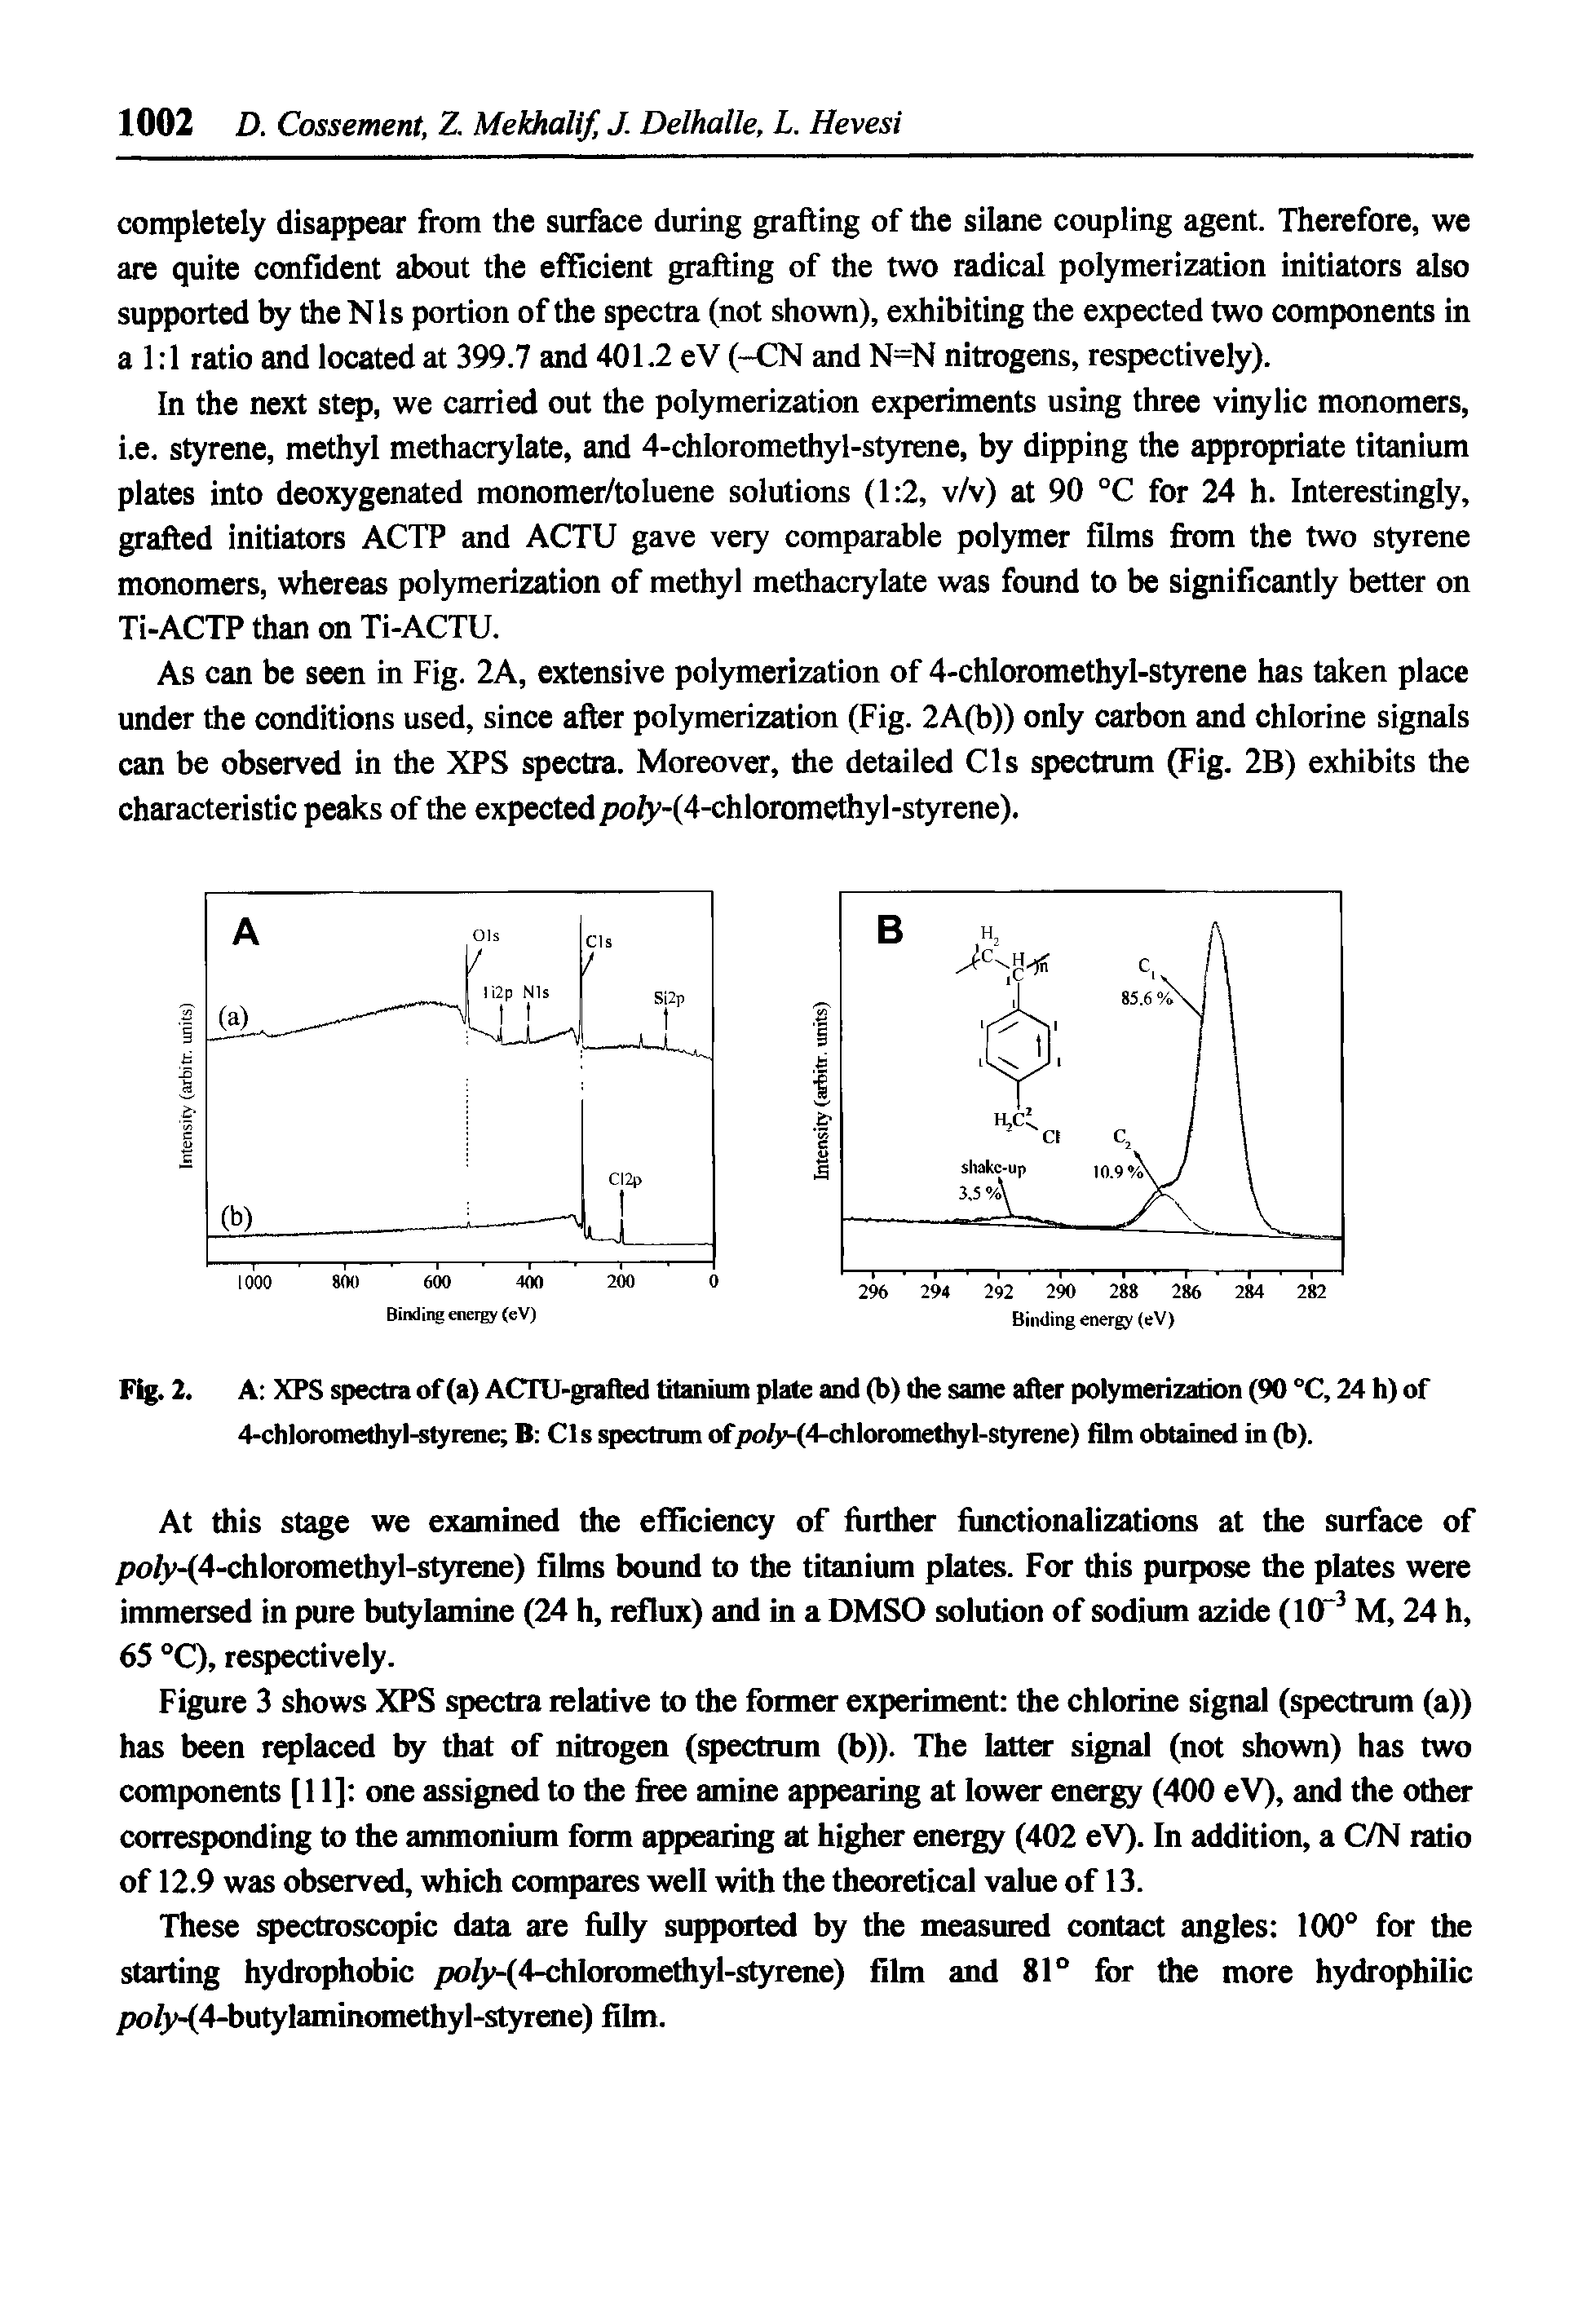 Fig. 2. A XPS spectra of (a) ACTU-grafted titanium plate and (b) the same after polymerization (90 °C, 24 h) of 4-chloromethyl-styFene B Cls spectrum ofpo/y-(4-chloromethyl-styrene) film obtained in (b).